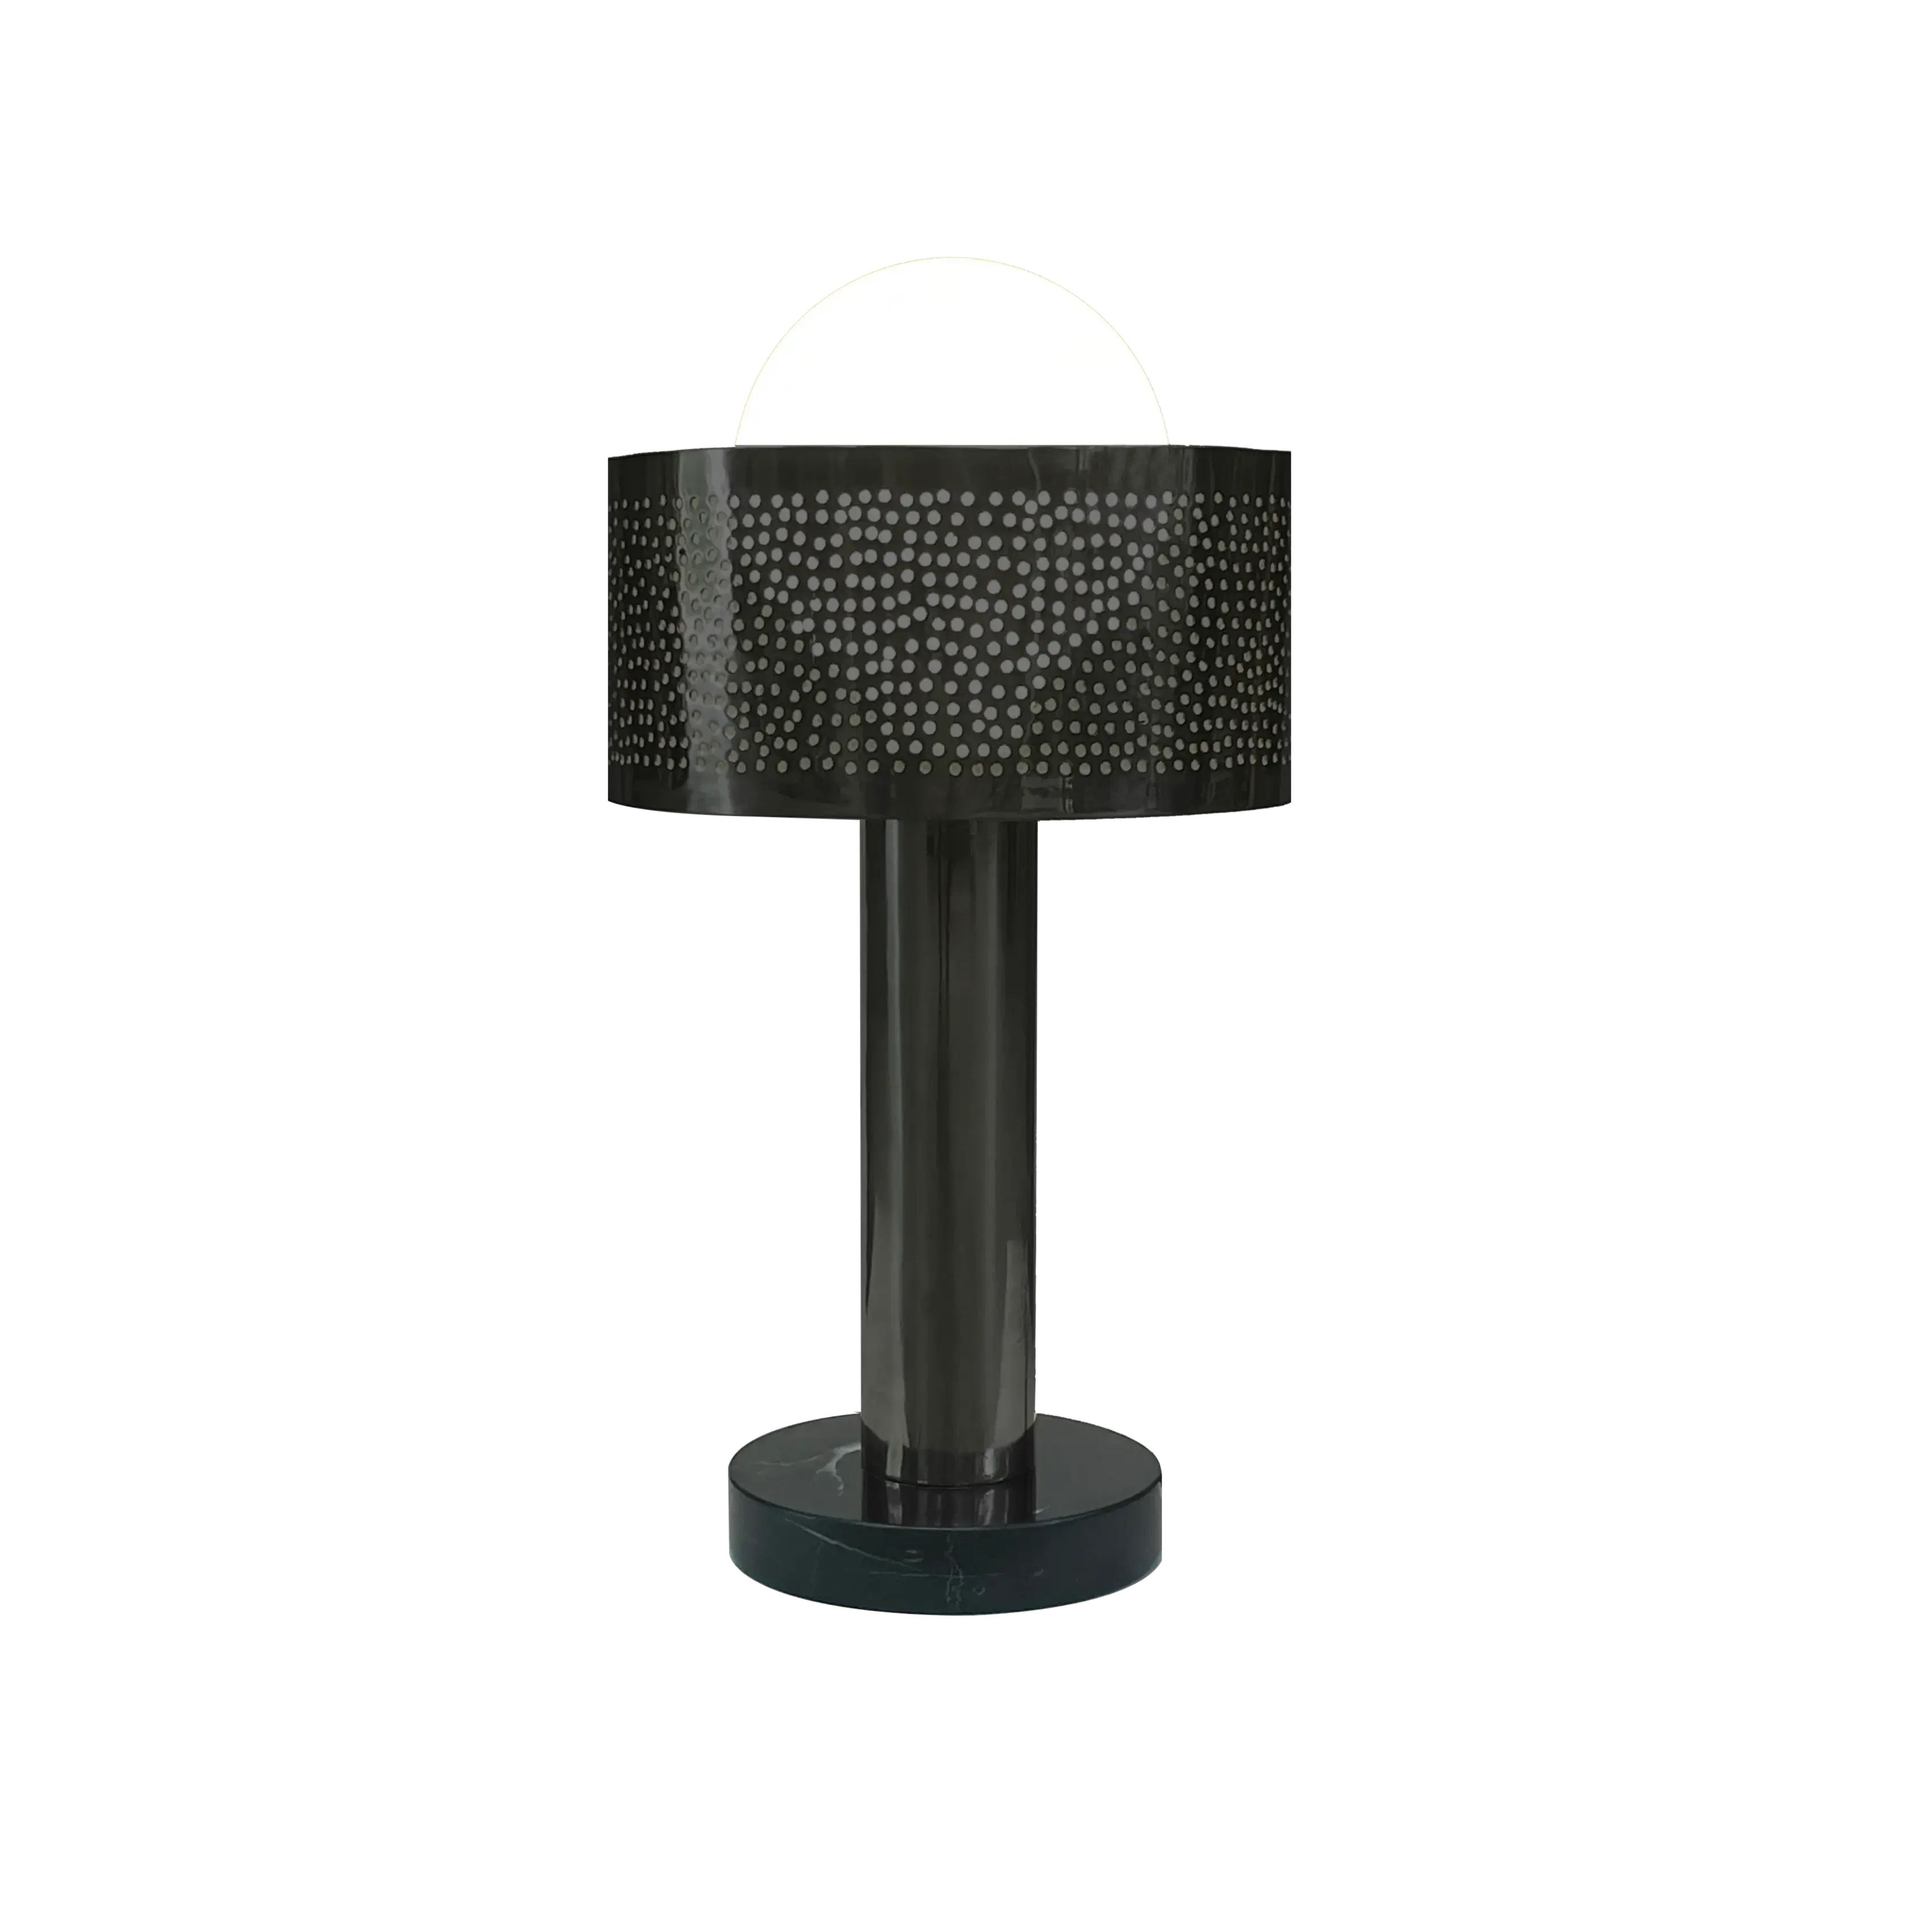 Dounia home Table lamp in Black made of Metal, Model: Alula